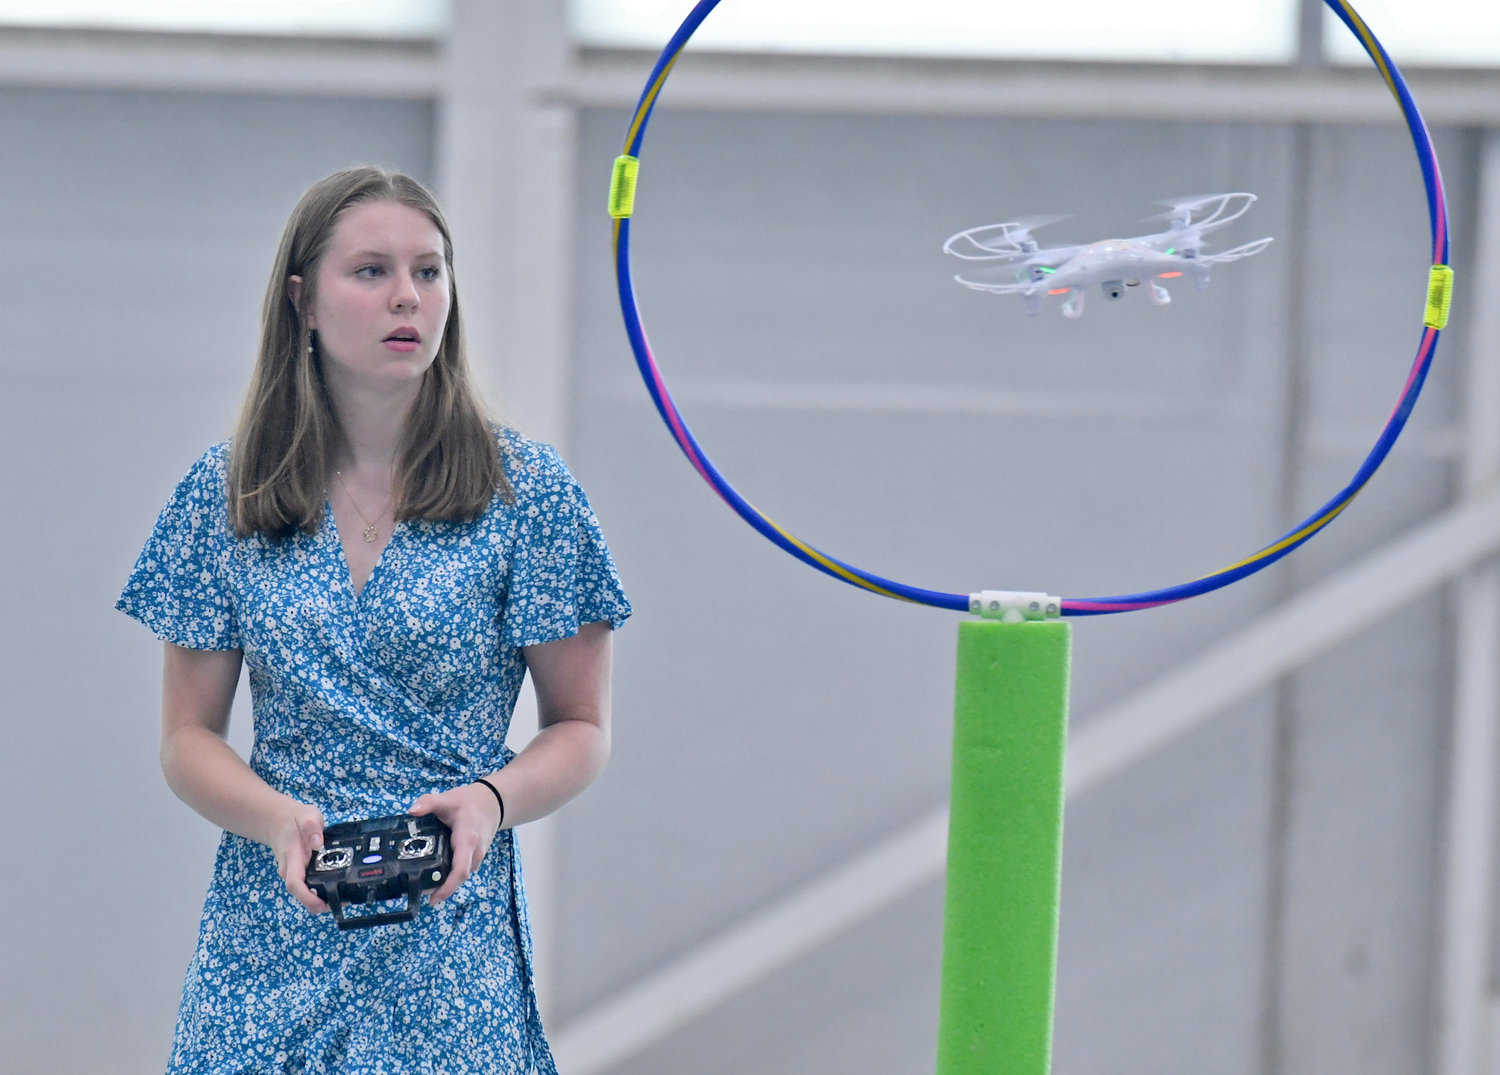 RFA junior Teyla McVay navigates her drone through one of the obstacles during the Directorate STEM Outreach Program's Drone Camp in the hangar at Innovare Advancement Center. Campers competed against each other on the final morning of the camp to see who could navigate the course the quickest and most accurately.